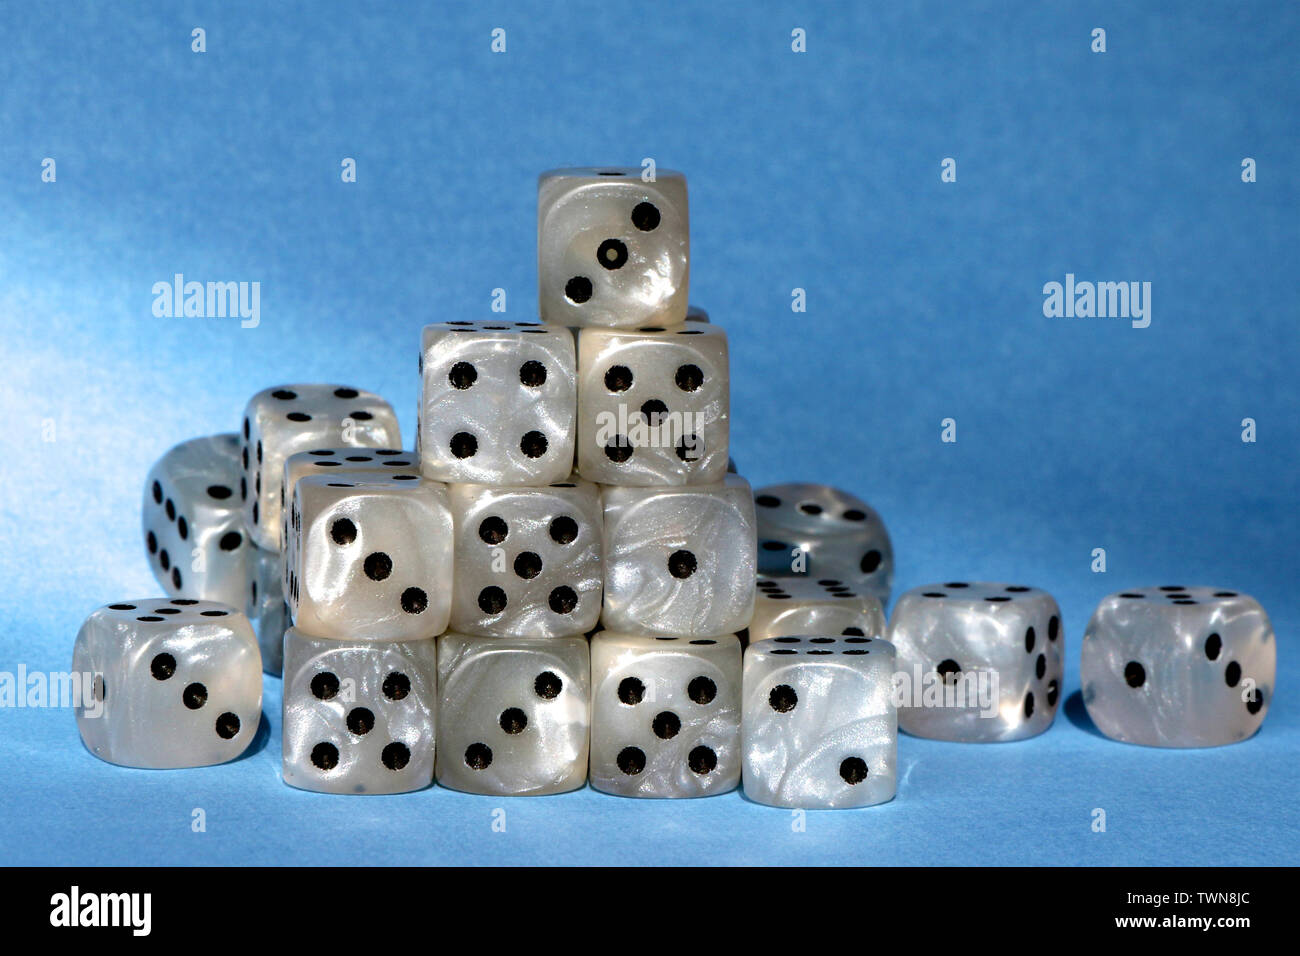 Stack of dice used for gambling. Stock Photo